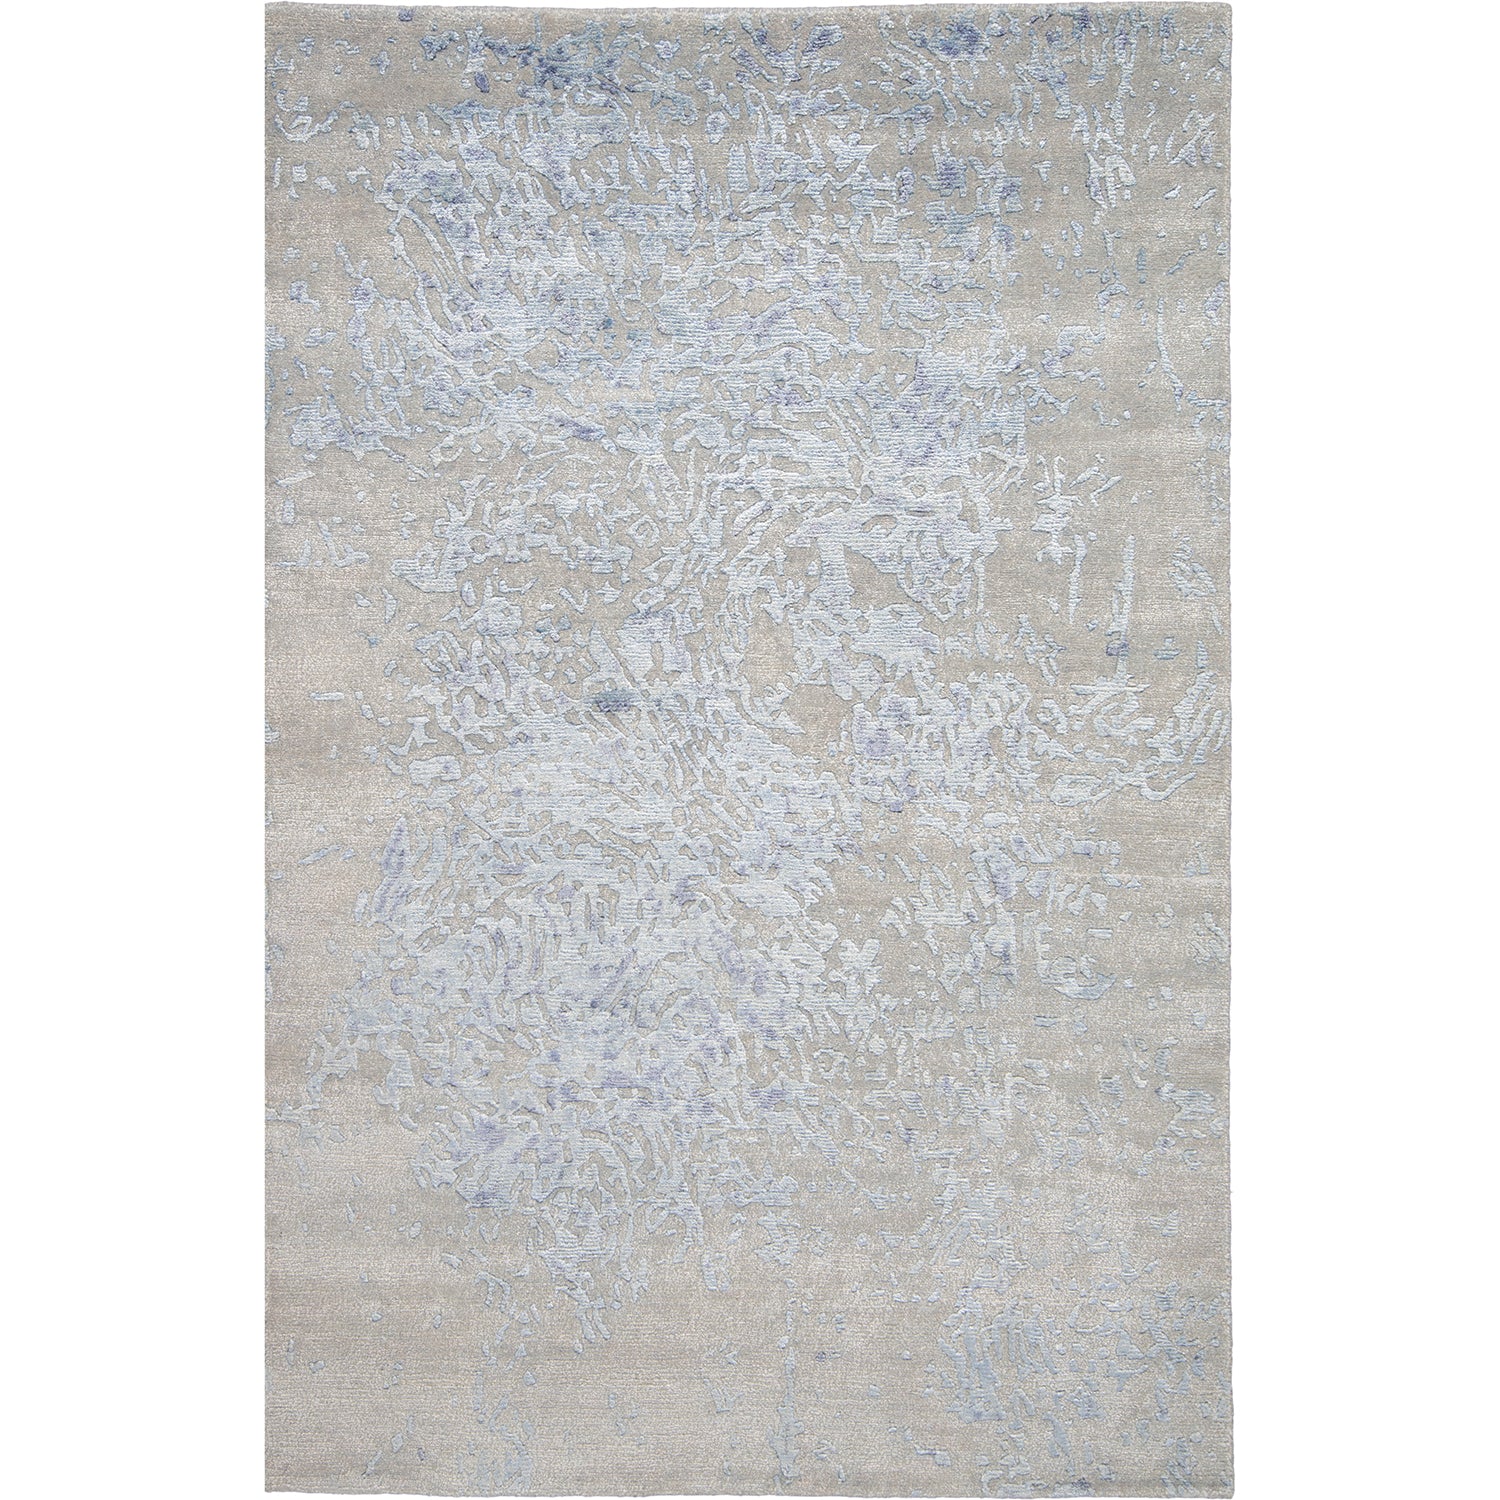 Contemporary rectangular area rug with intricate coral-inspired pattern in beige.